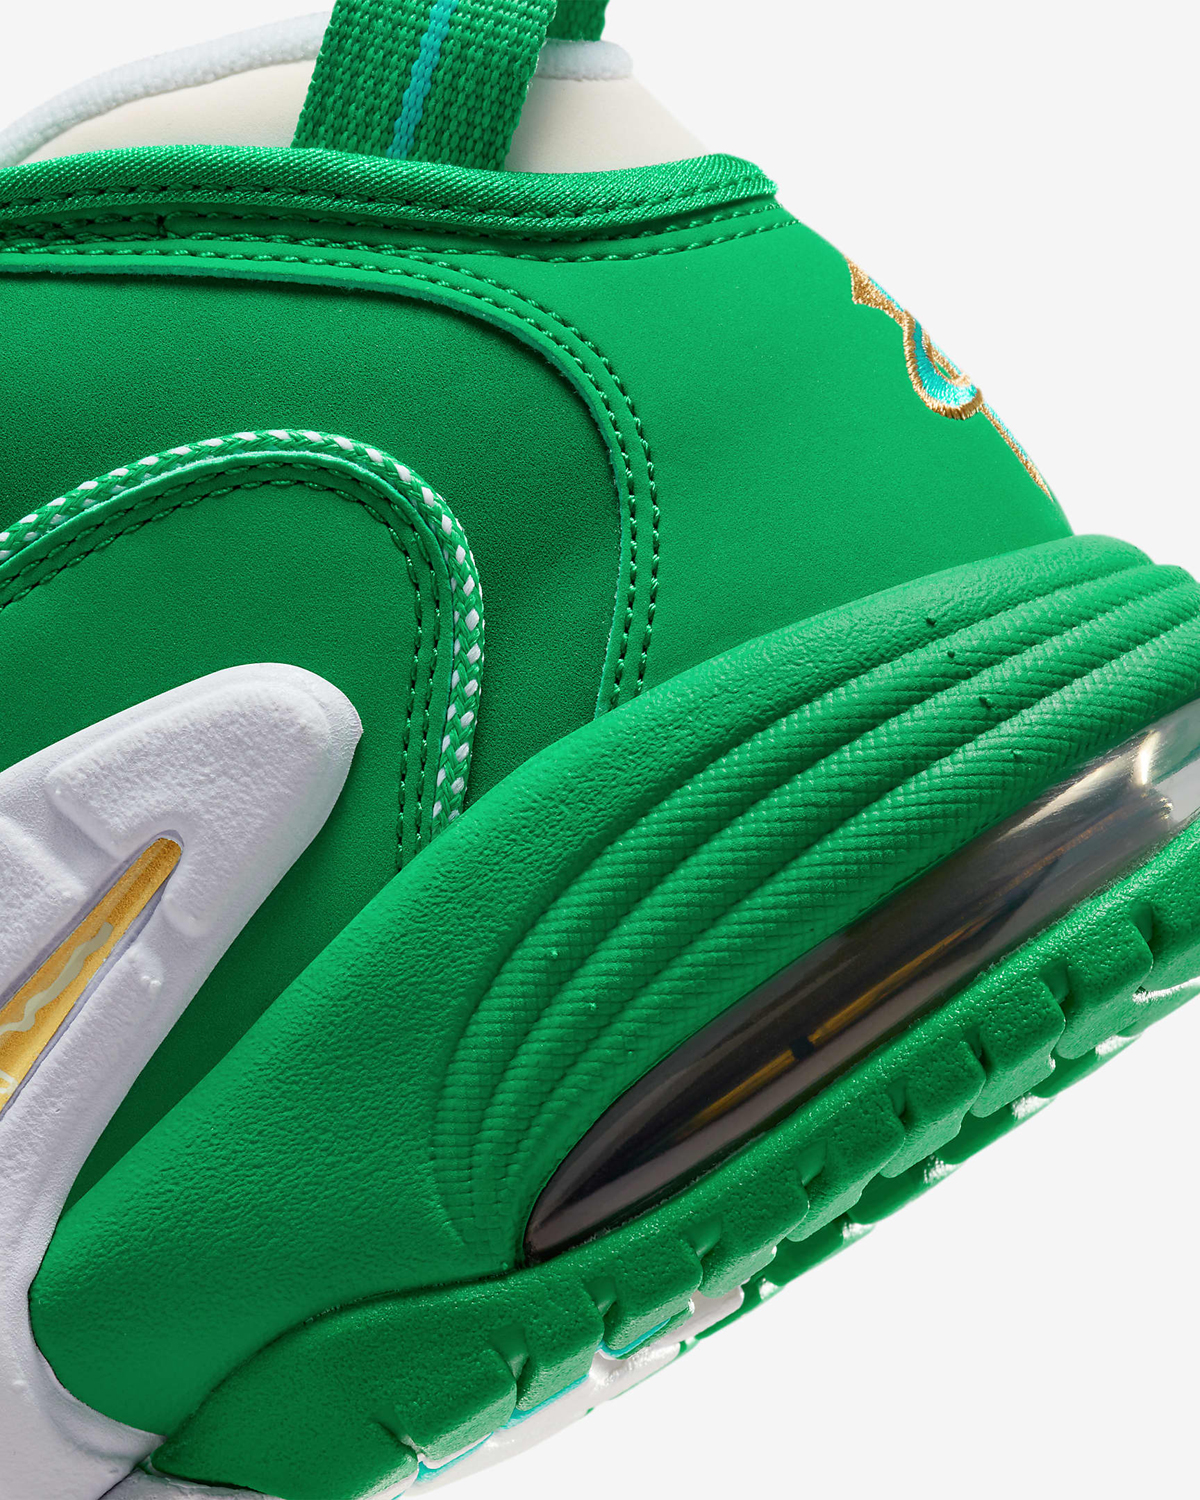 Nike Air Max Penny Stadium Green Release Date 8